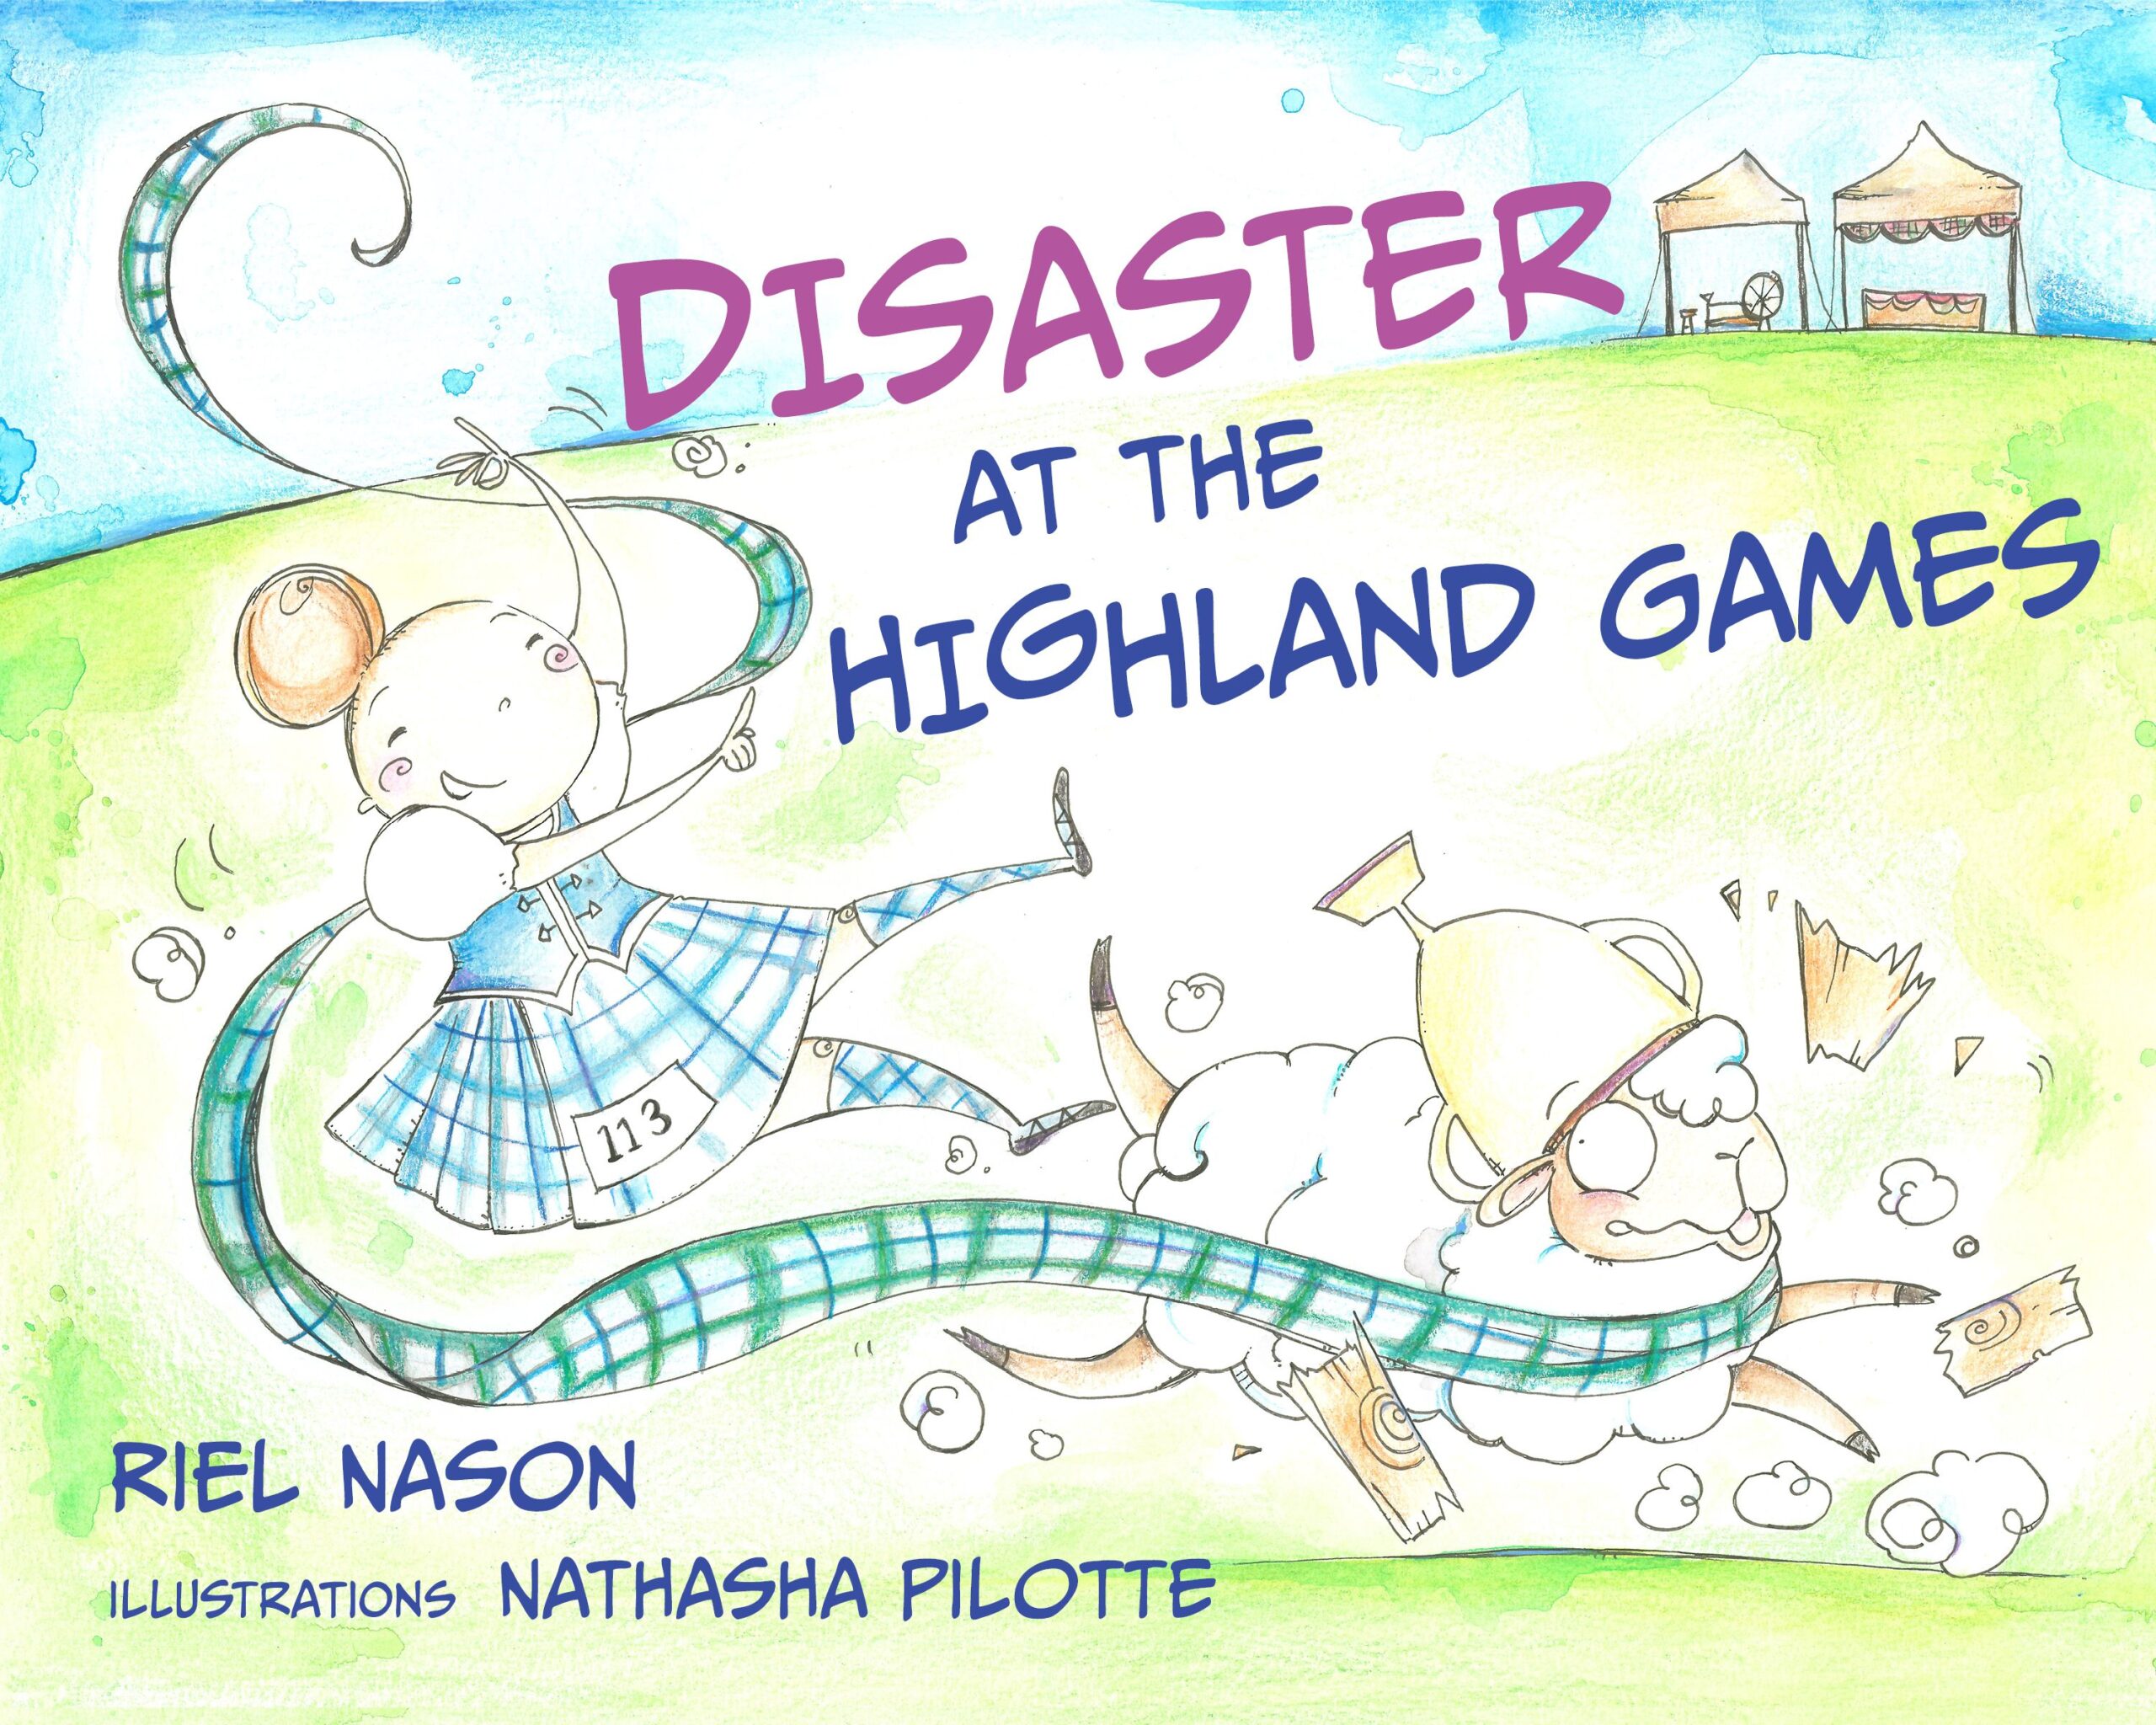 Young Reader Review: Disaster at the Highland Games by Riel Nason